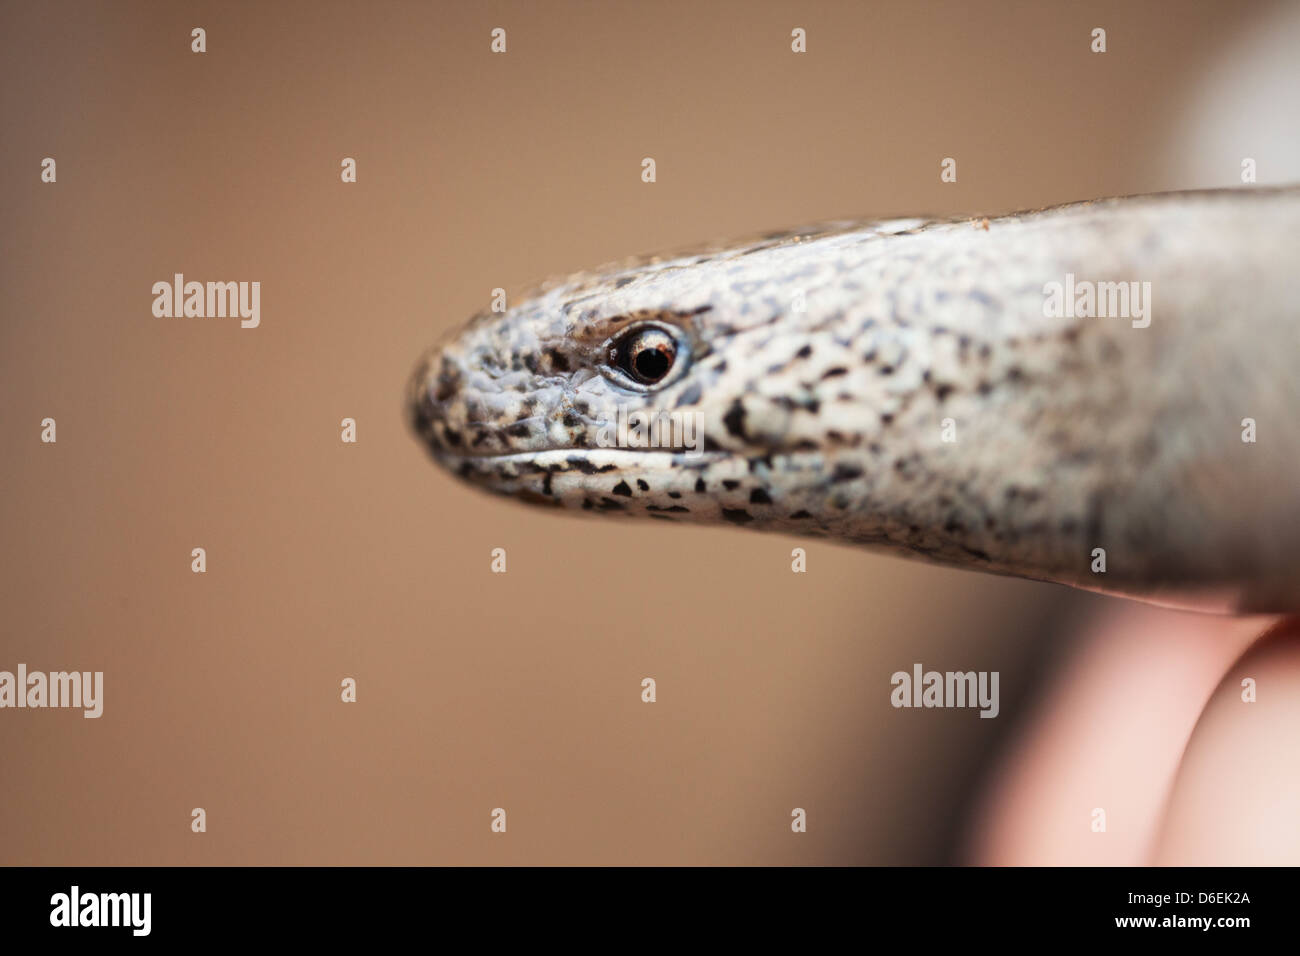 A close-up of a slow worm Stock Photo